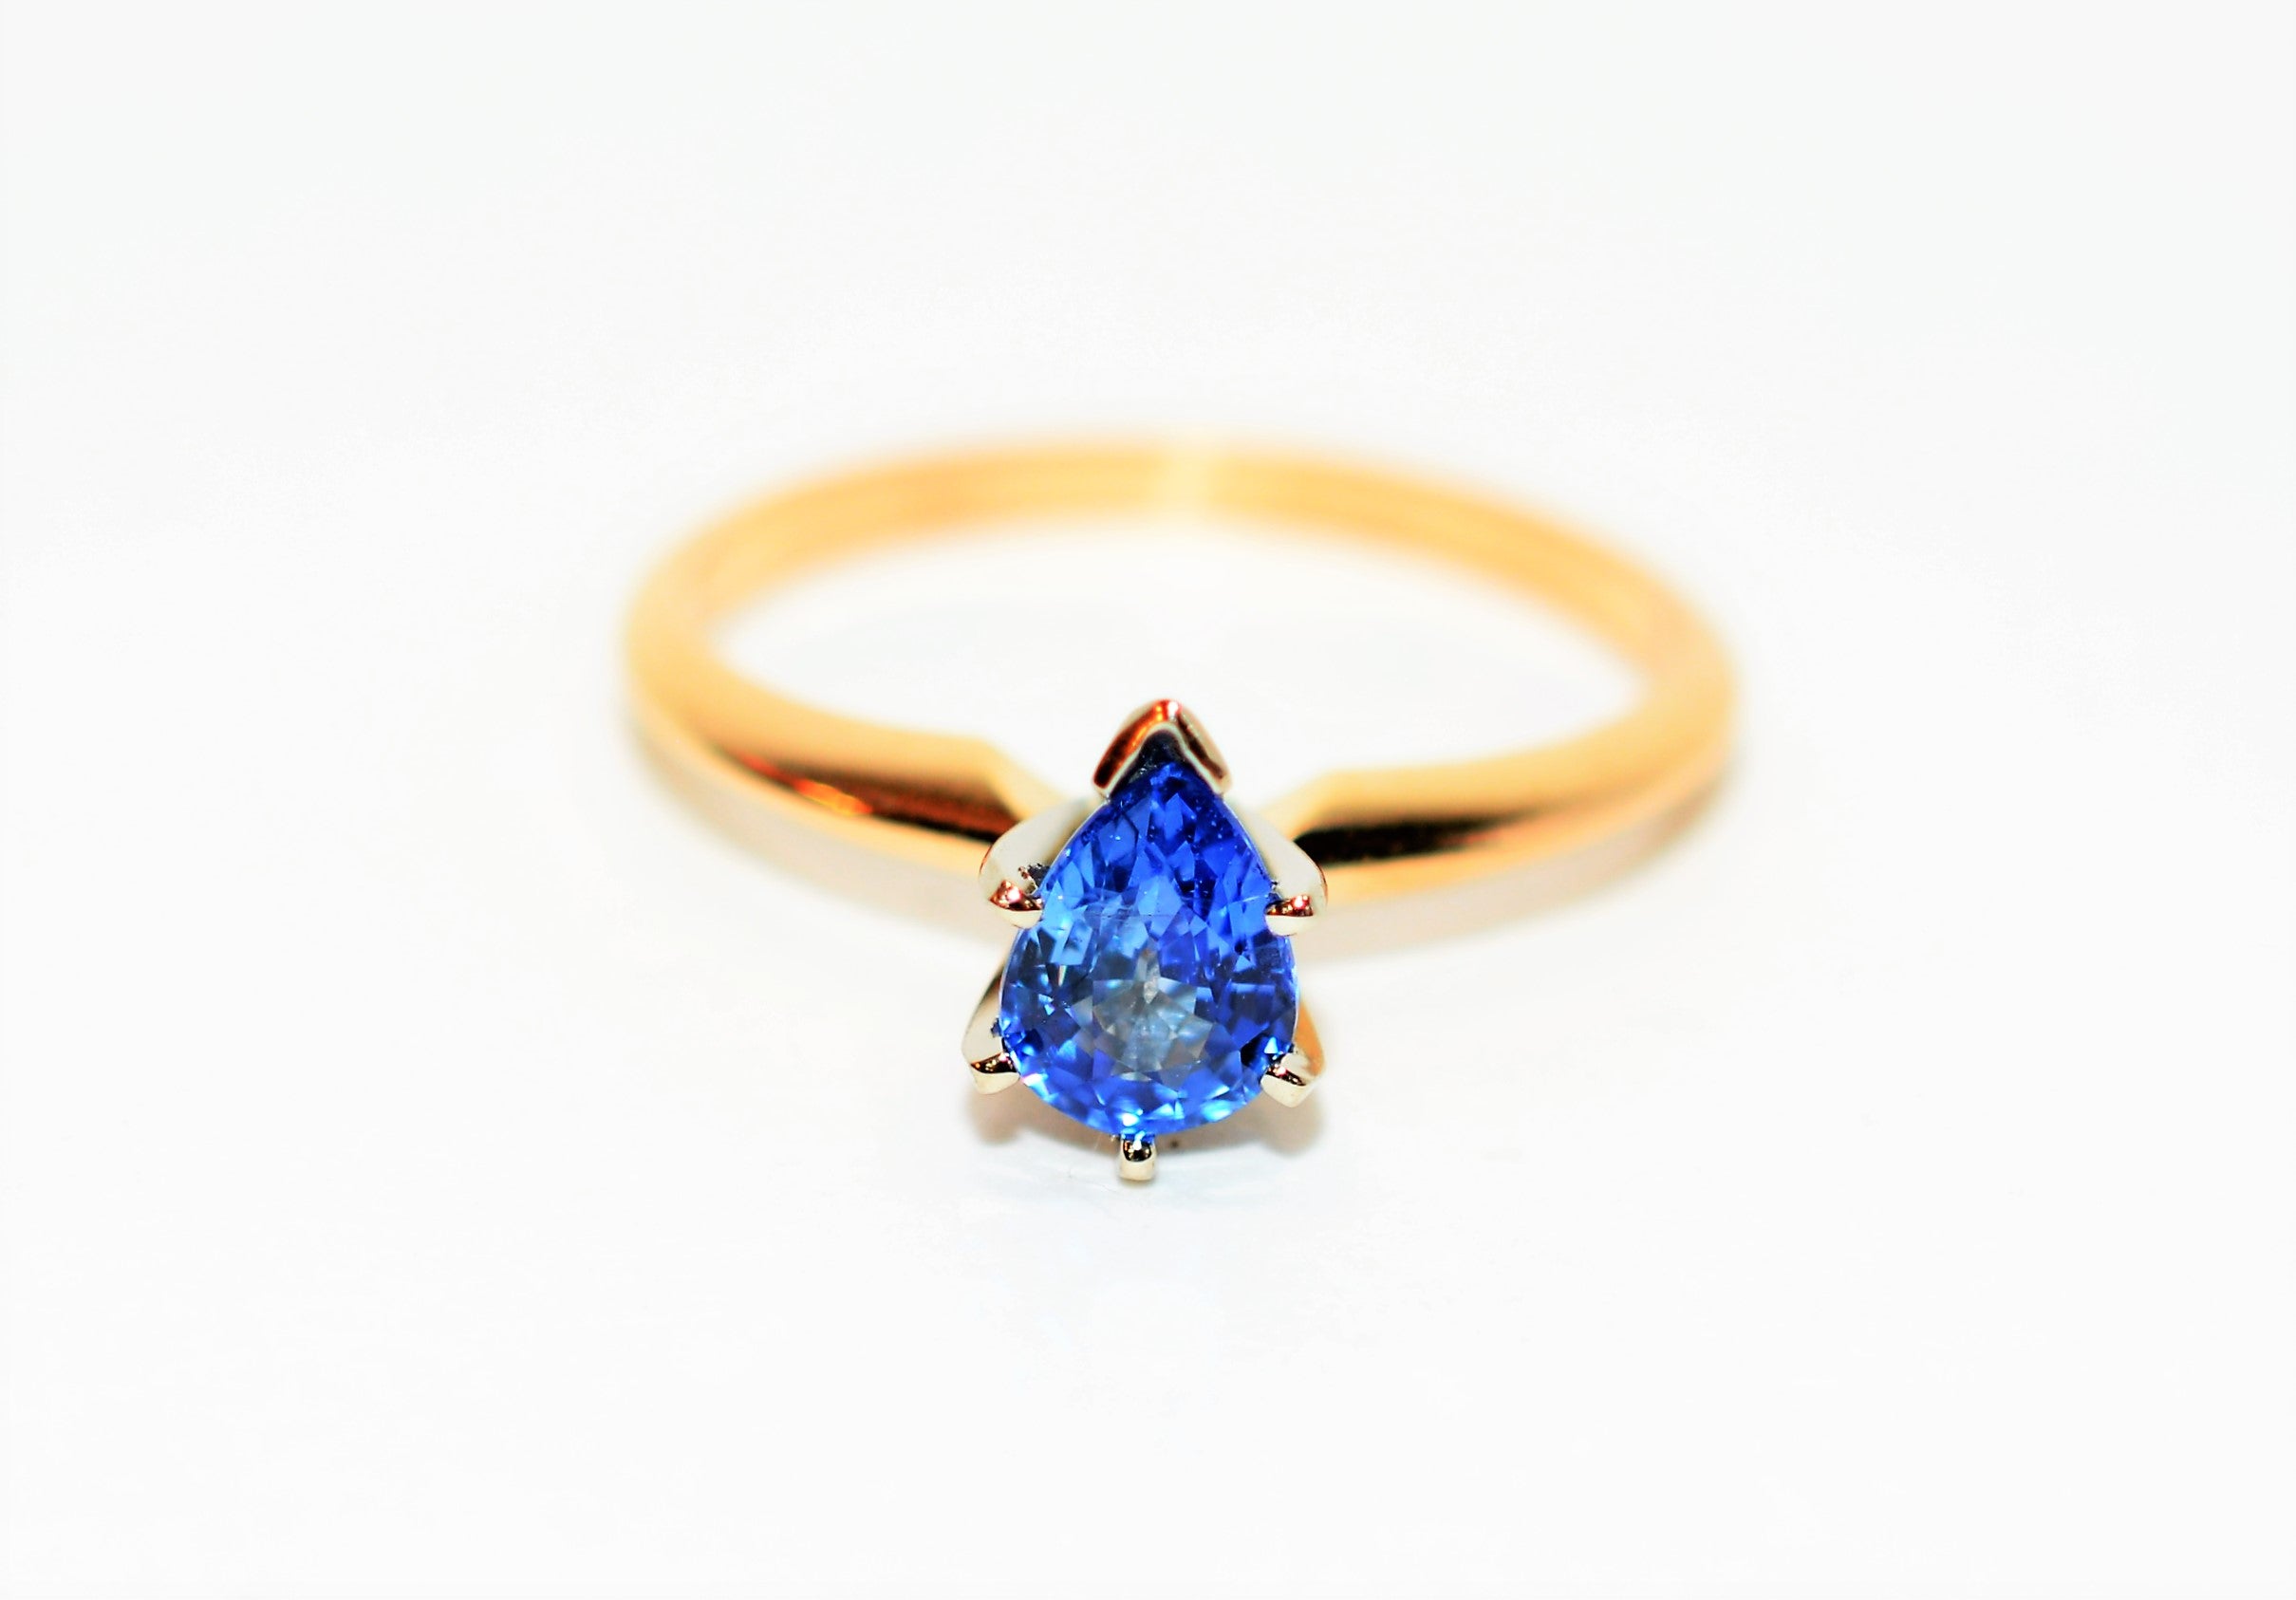 Natural Ceylon Sapphire Ring 14K Solid Gold .94ct Sri Lankan Sapphire Ring Engagement Ring Wedding Ring Promise Ring Solitaire Ring Bridal